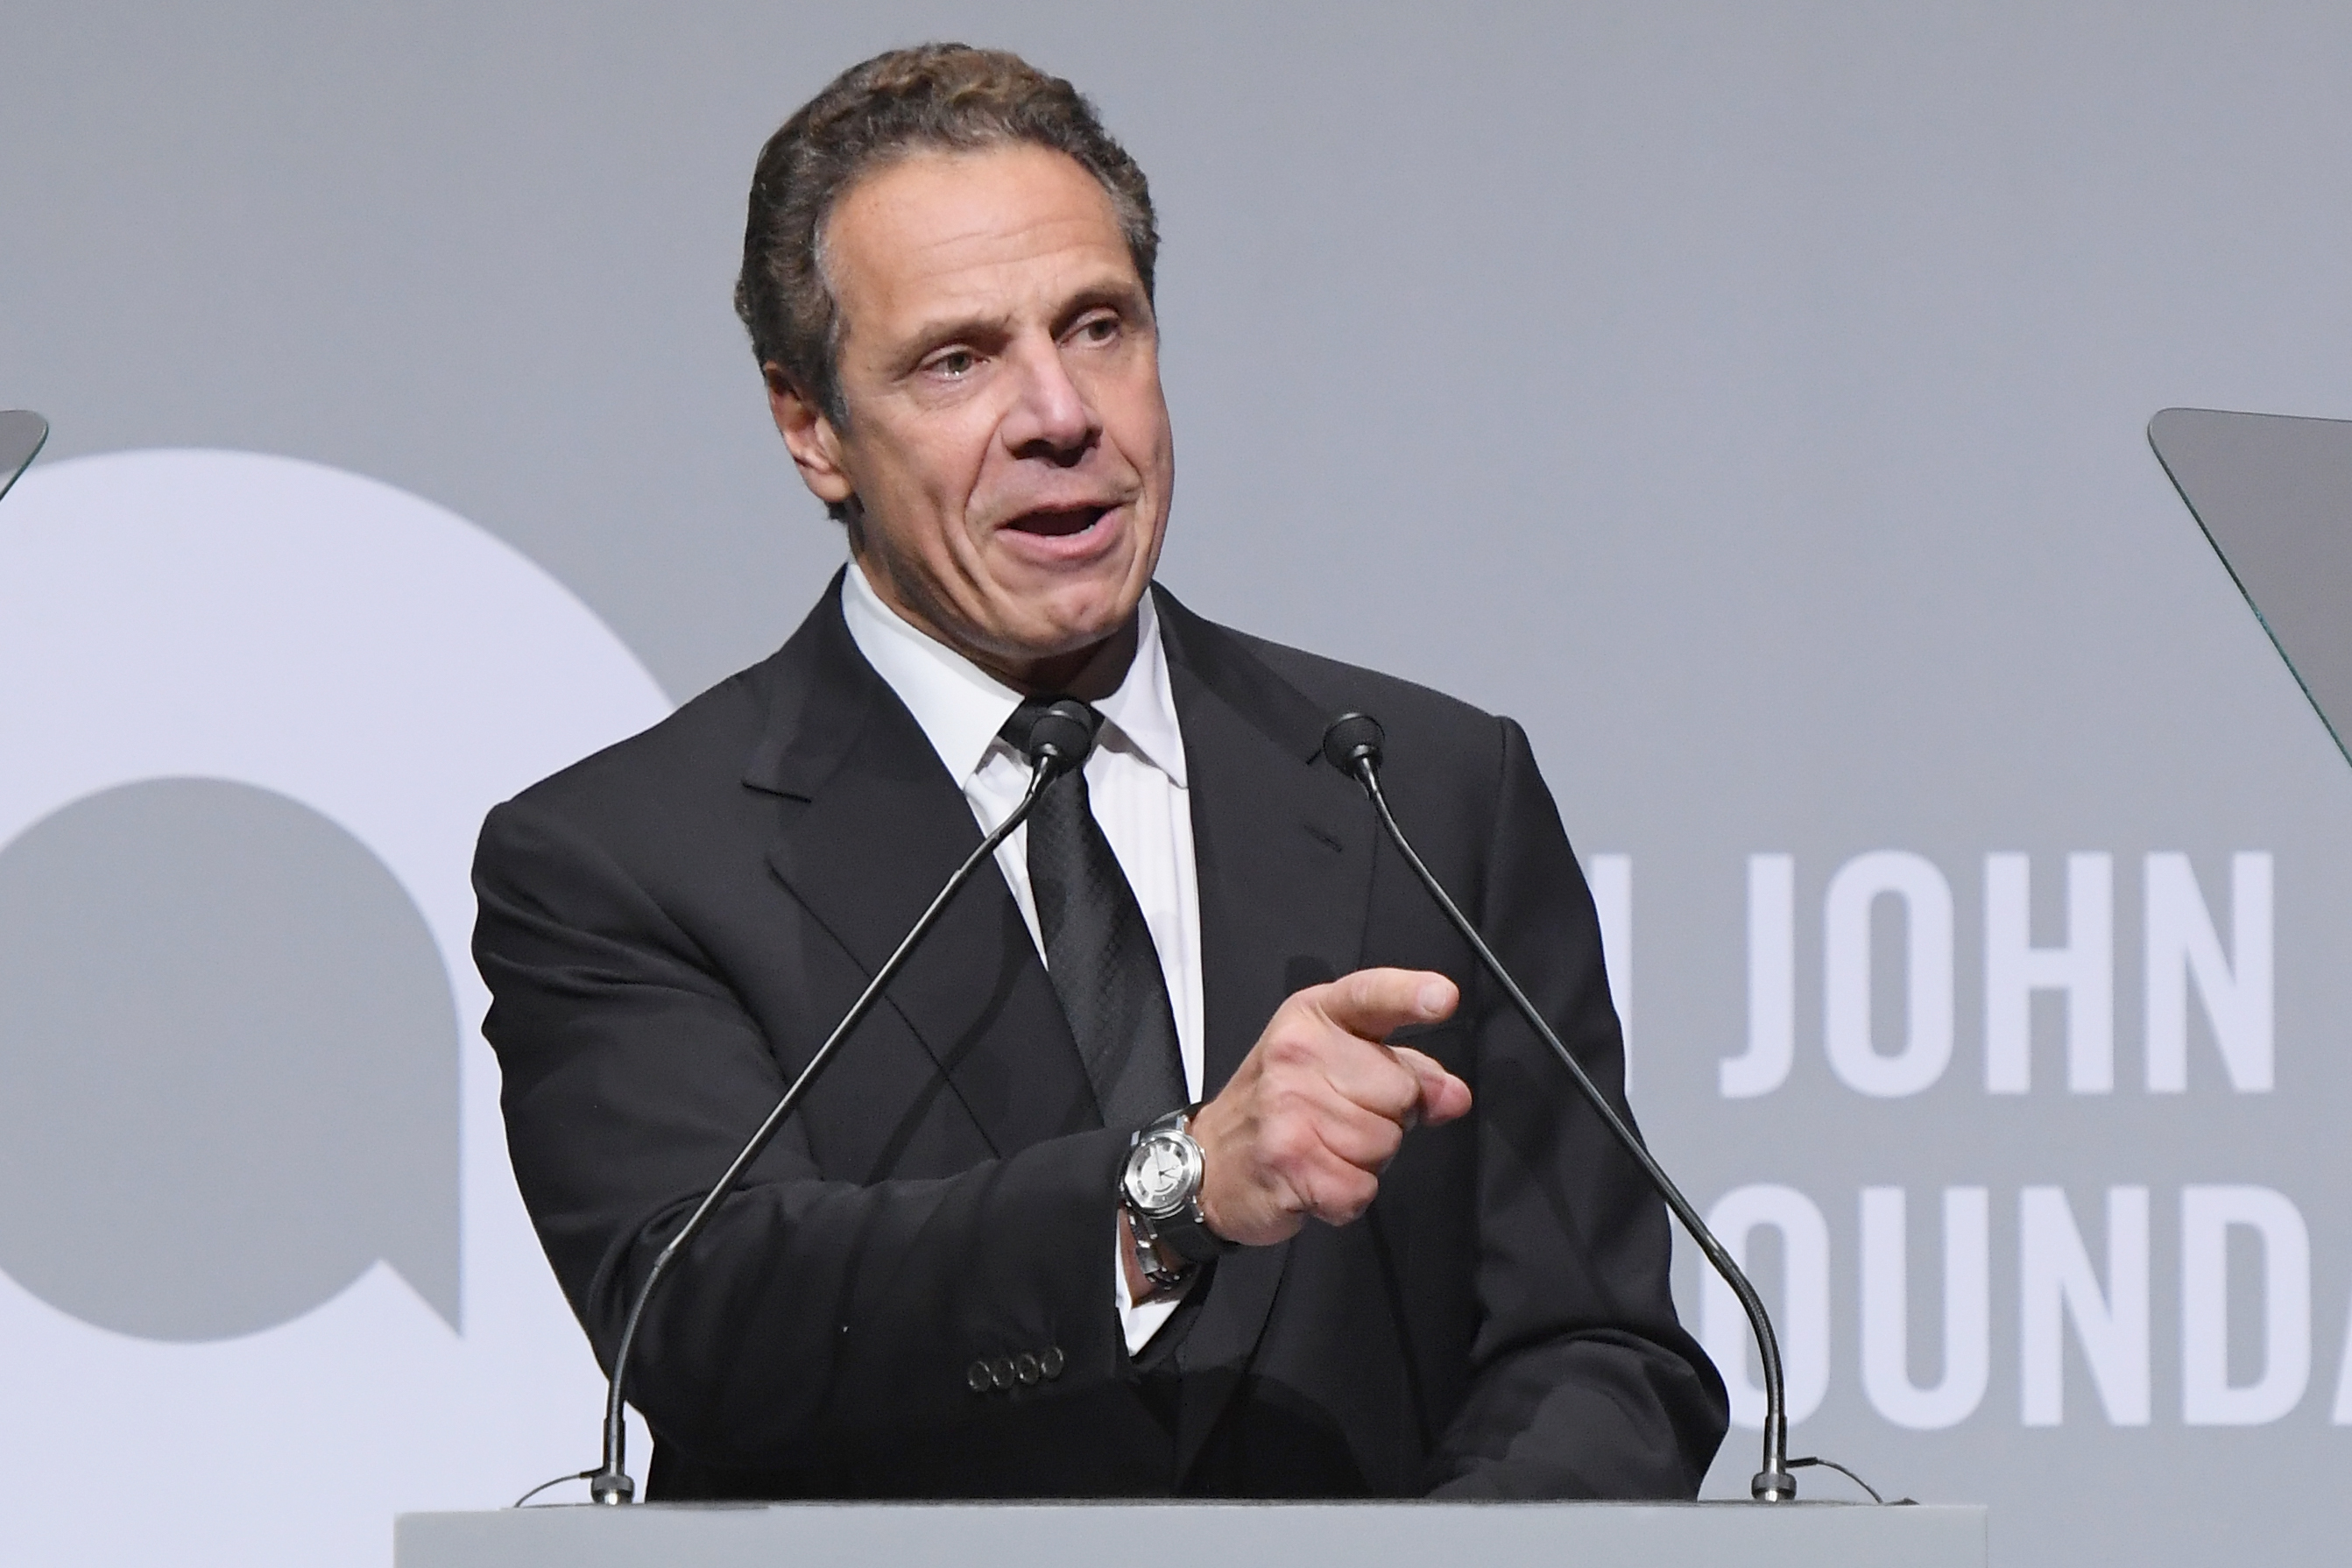 New York Governor Andrew Cuomo speaks onstage at the Elton John AIDS Foundation Commemorates Its 25th Year And Honors Founder Sir Elton John During New York Fall Gala at Cathedral of St. John the Divine on Nov. 7, 2017 in New York City. (Dimitrios Kambouris—Getty Images)